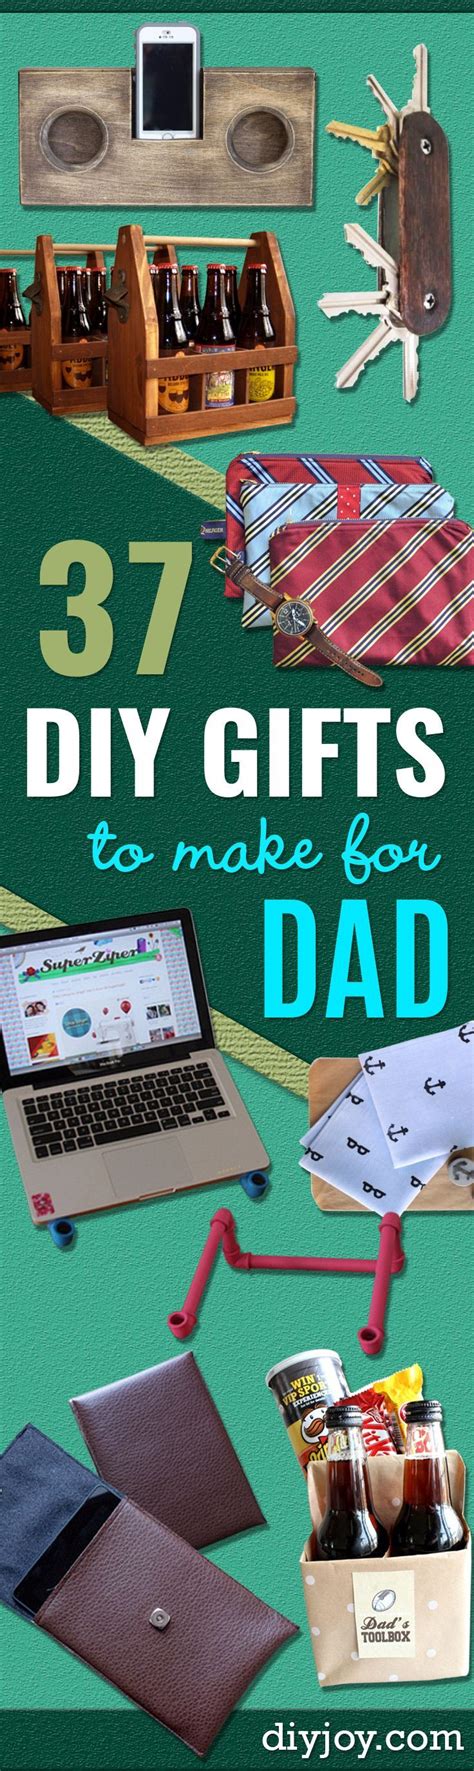 Share this funny father's day card with no butter pop than your dad. 37 DIY Gifts to Make for Dad | Diy gifts to make, Diy ...